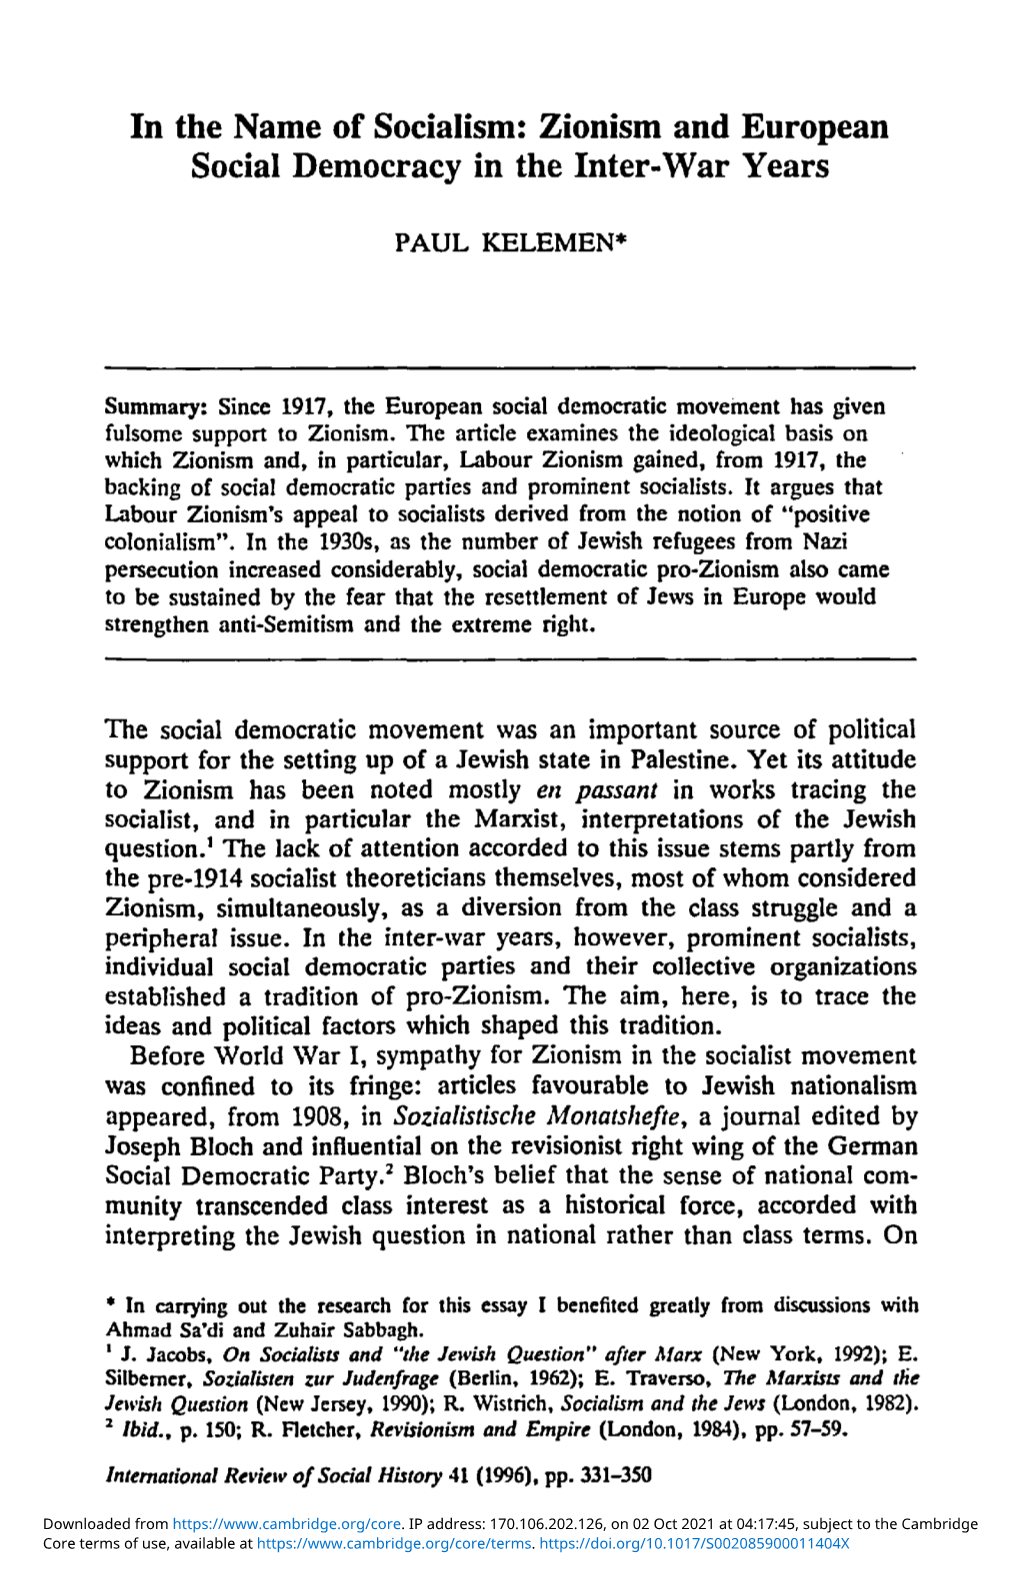 Zionism and European Social Democracy in the Inter-War Years